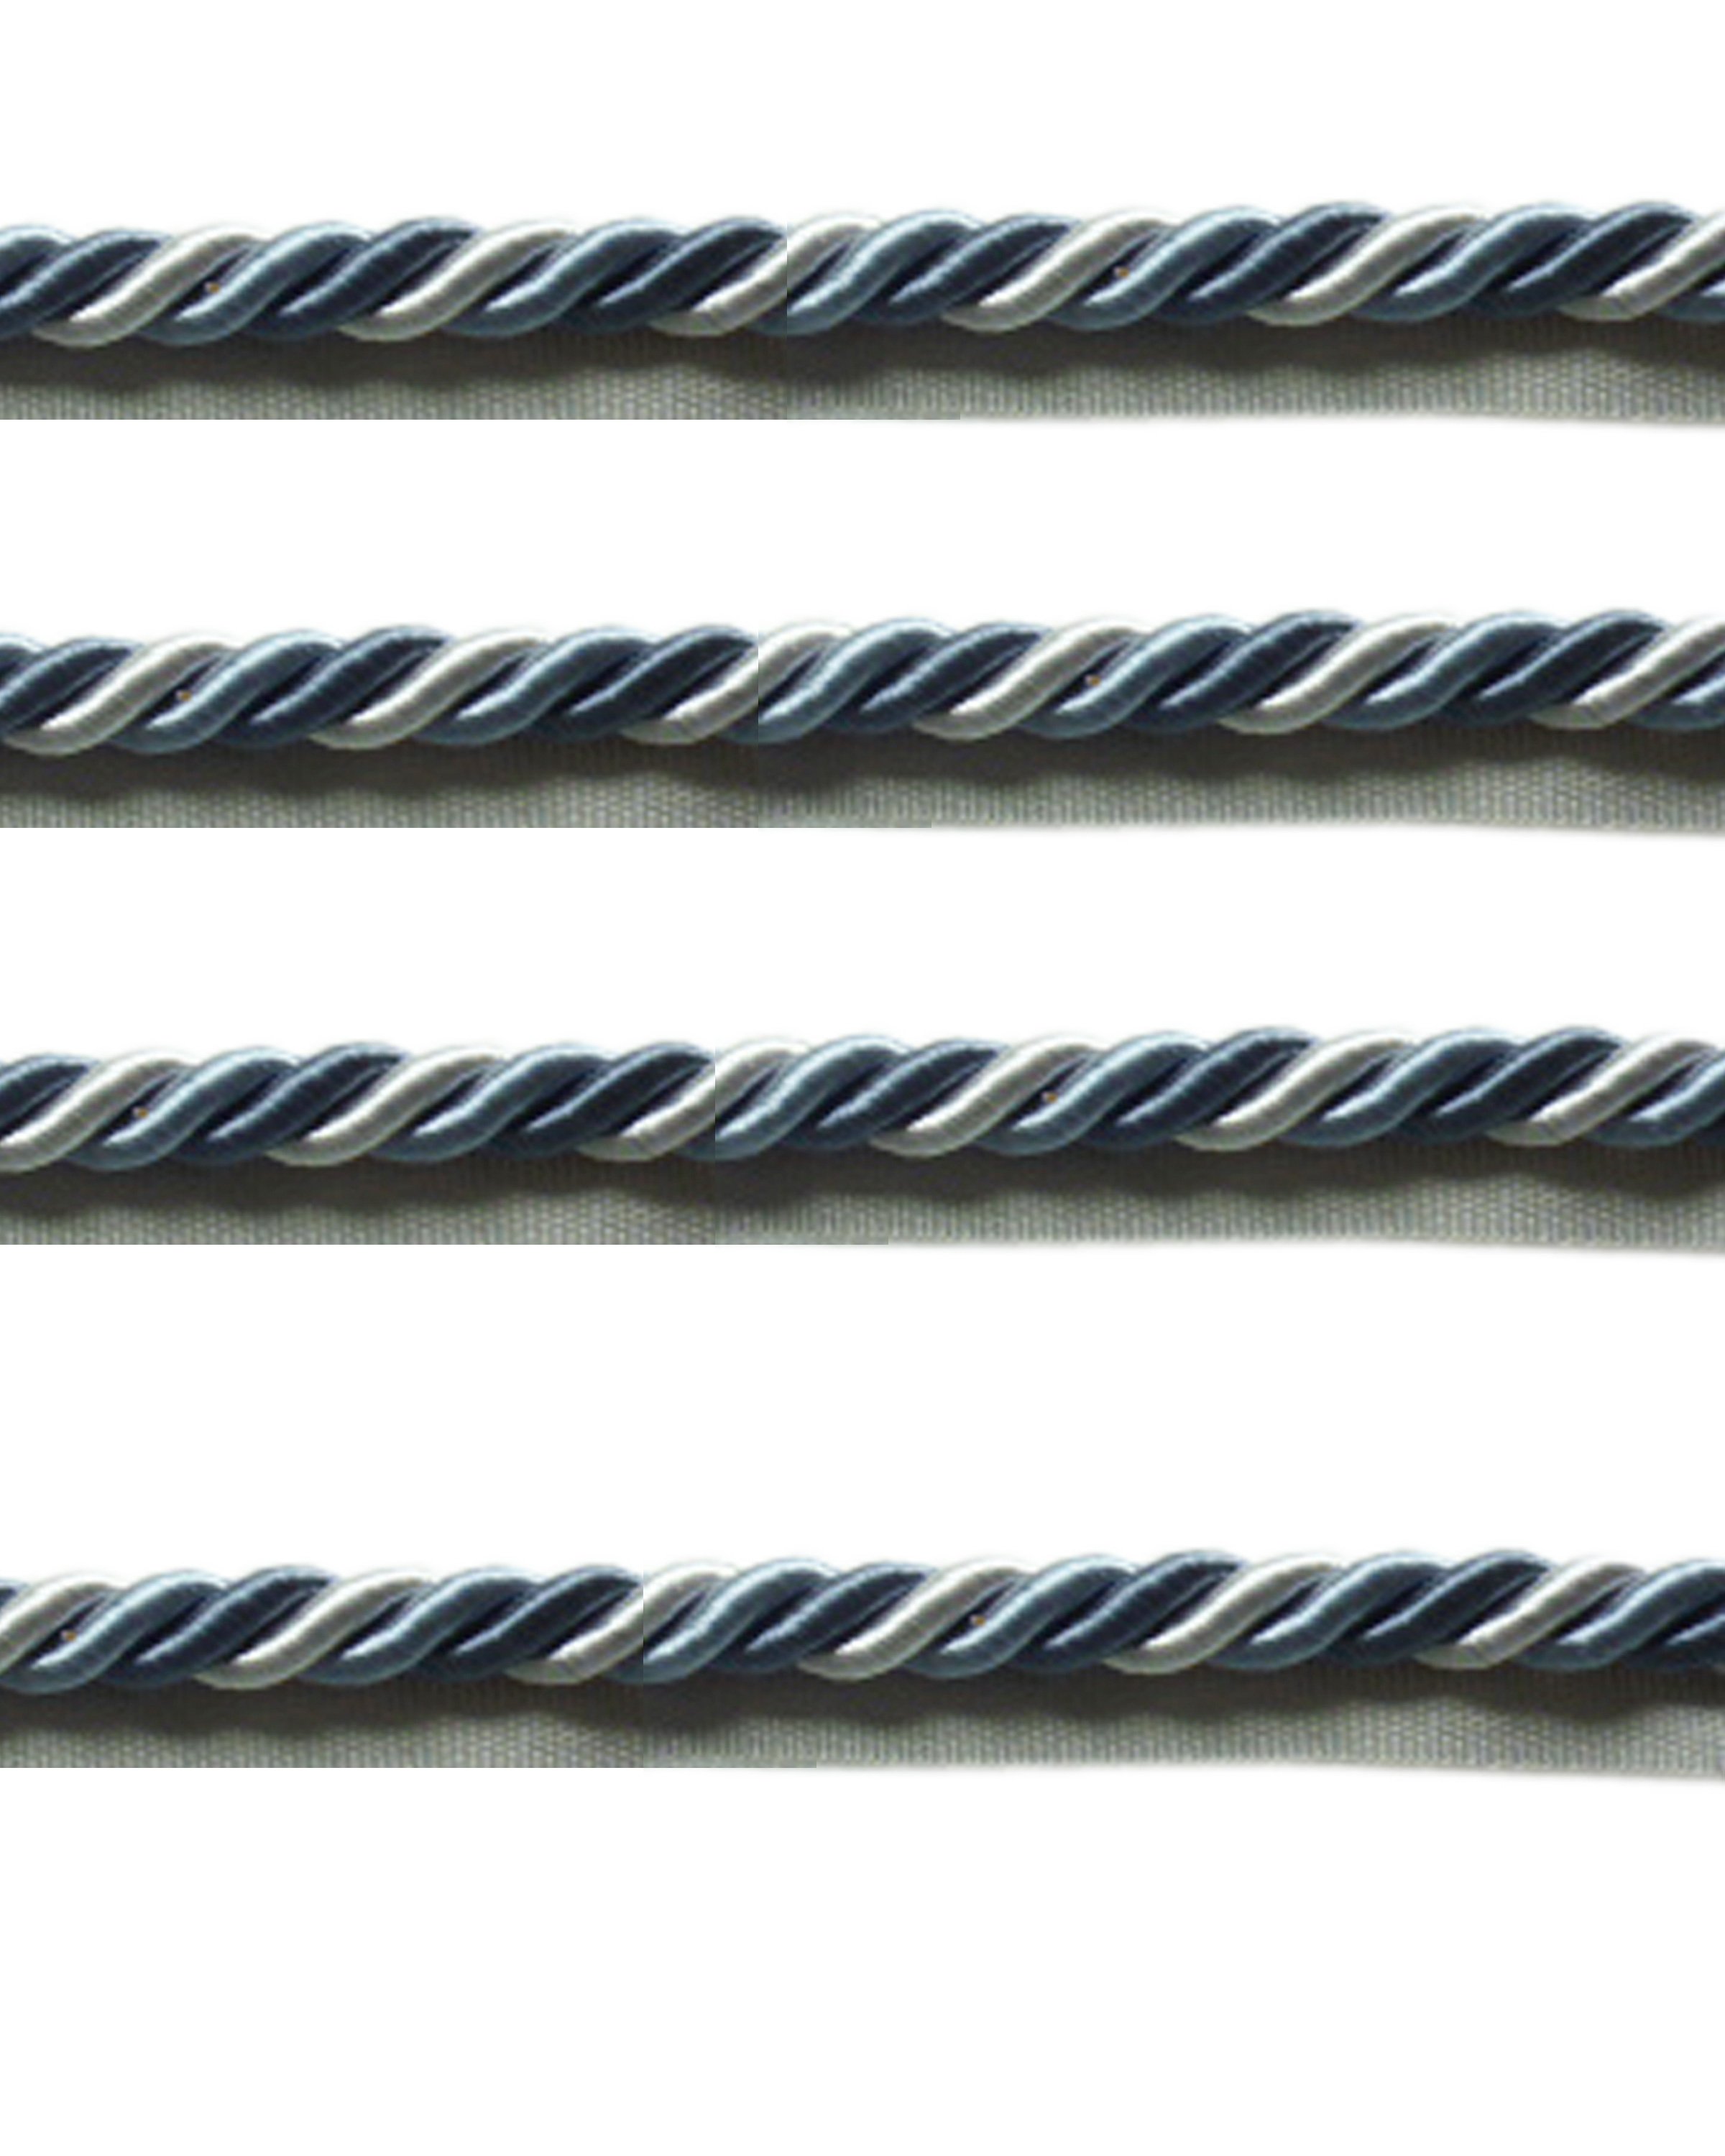 Piping Cord 8mm on Tape - Blue Price is for 5 metres